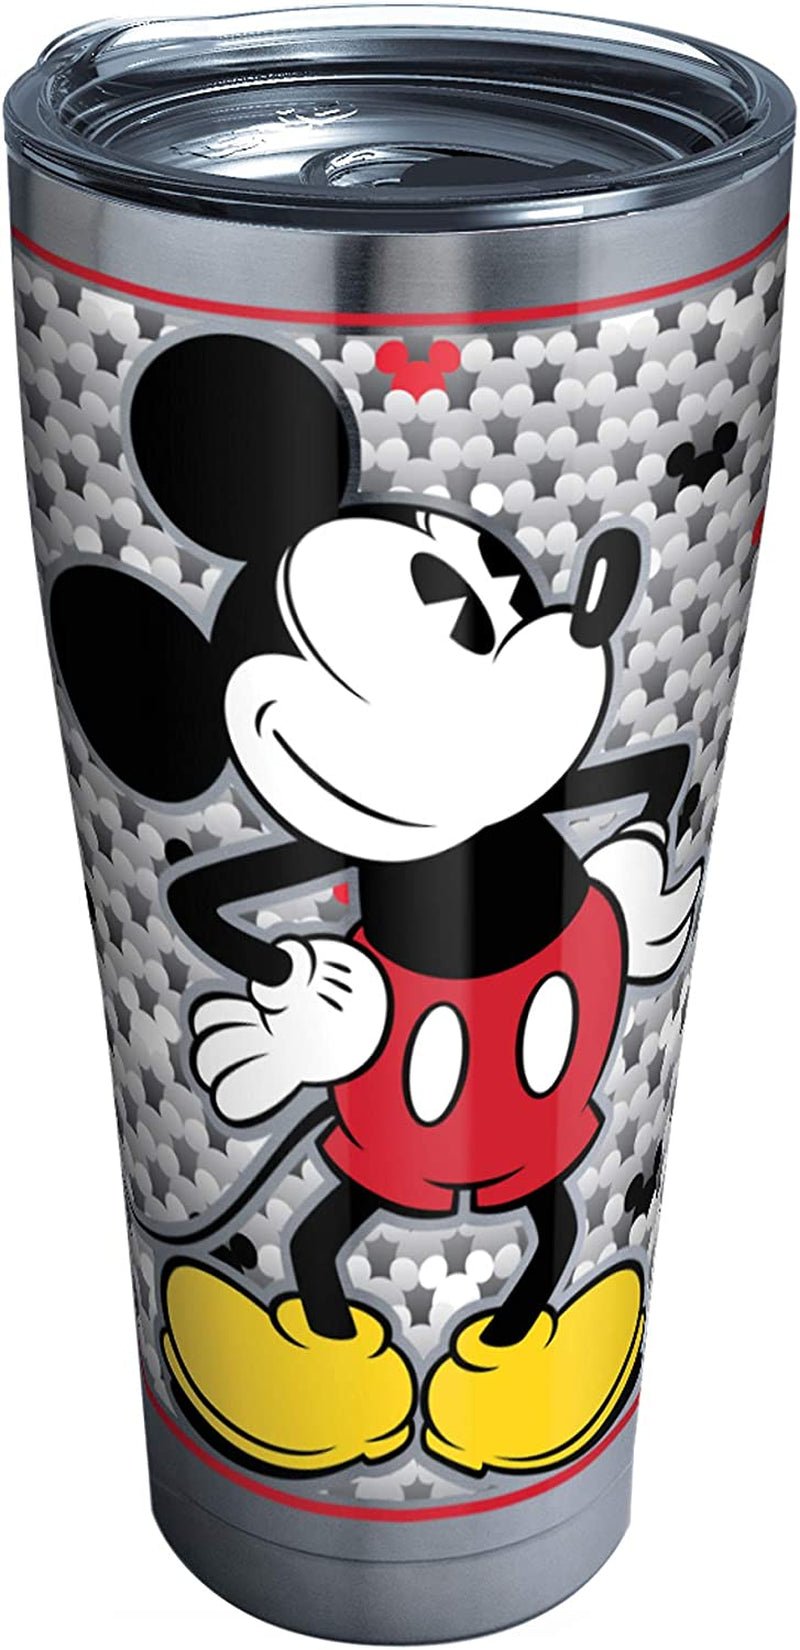 Tervis 1292884 Disney-Mickey Mouse Tumbler with Clear and Black Hammer Lid, 20 Oz Stainless Steel, Silver